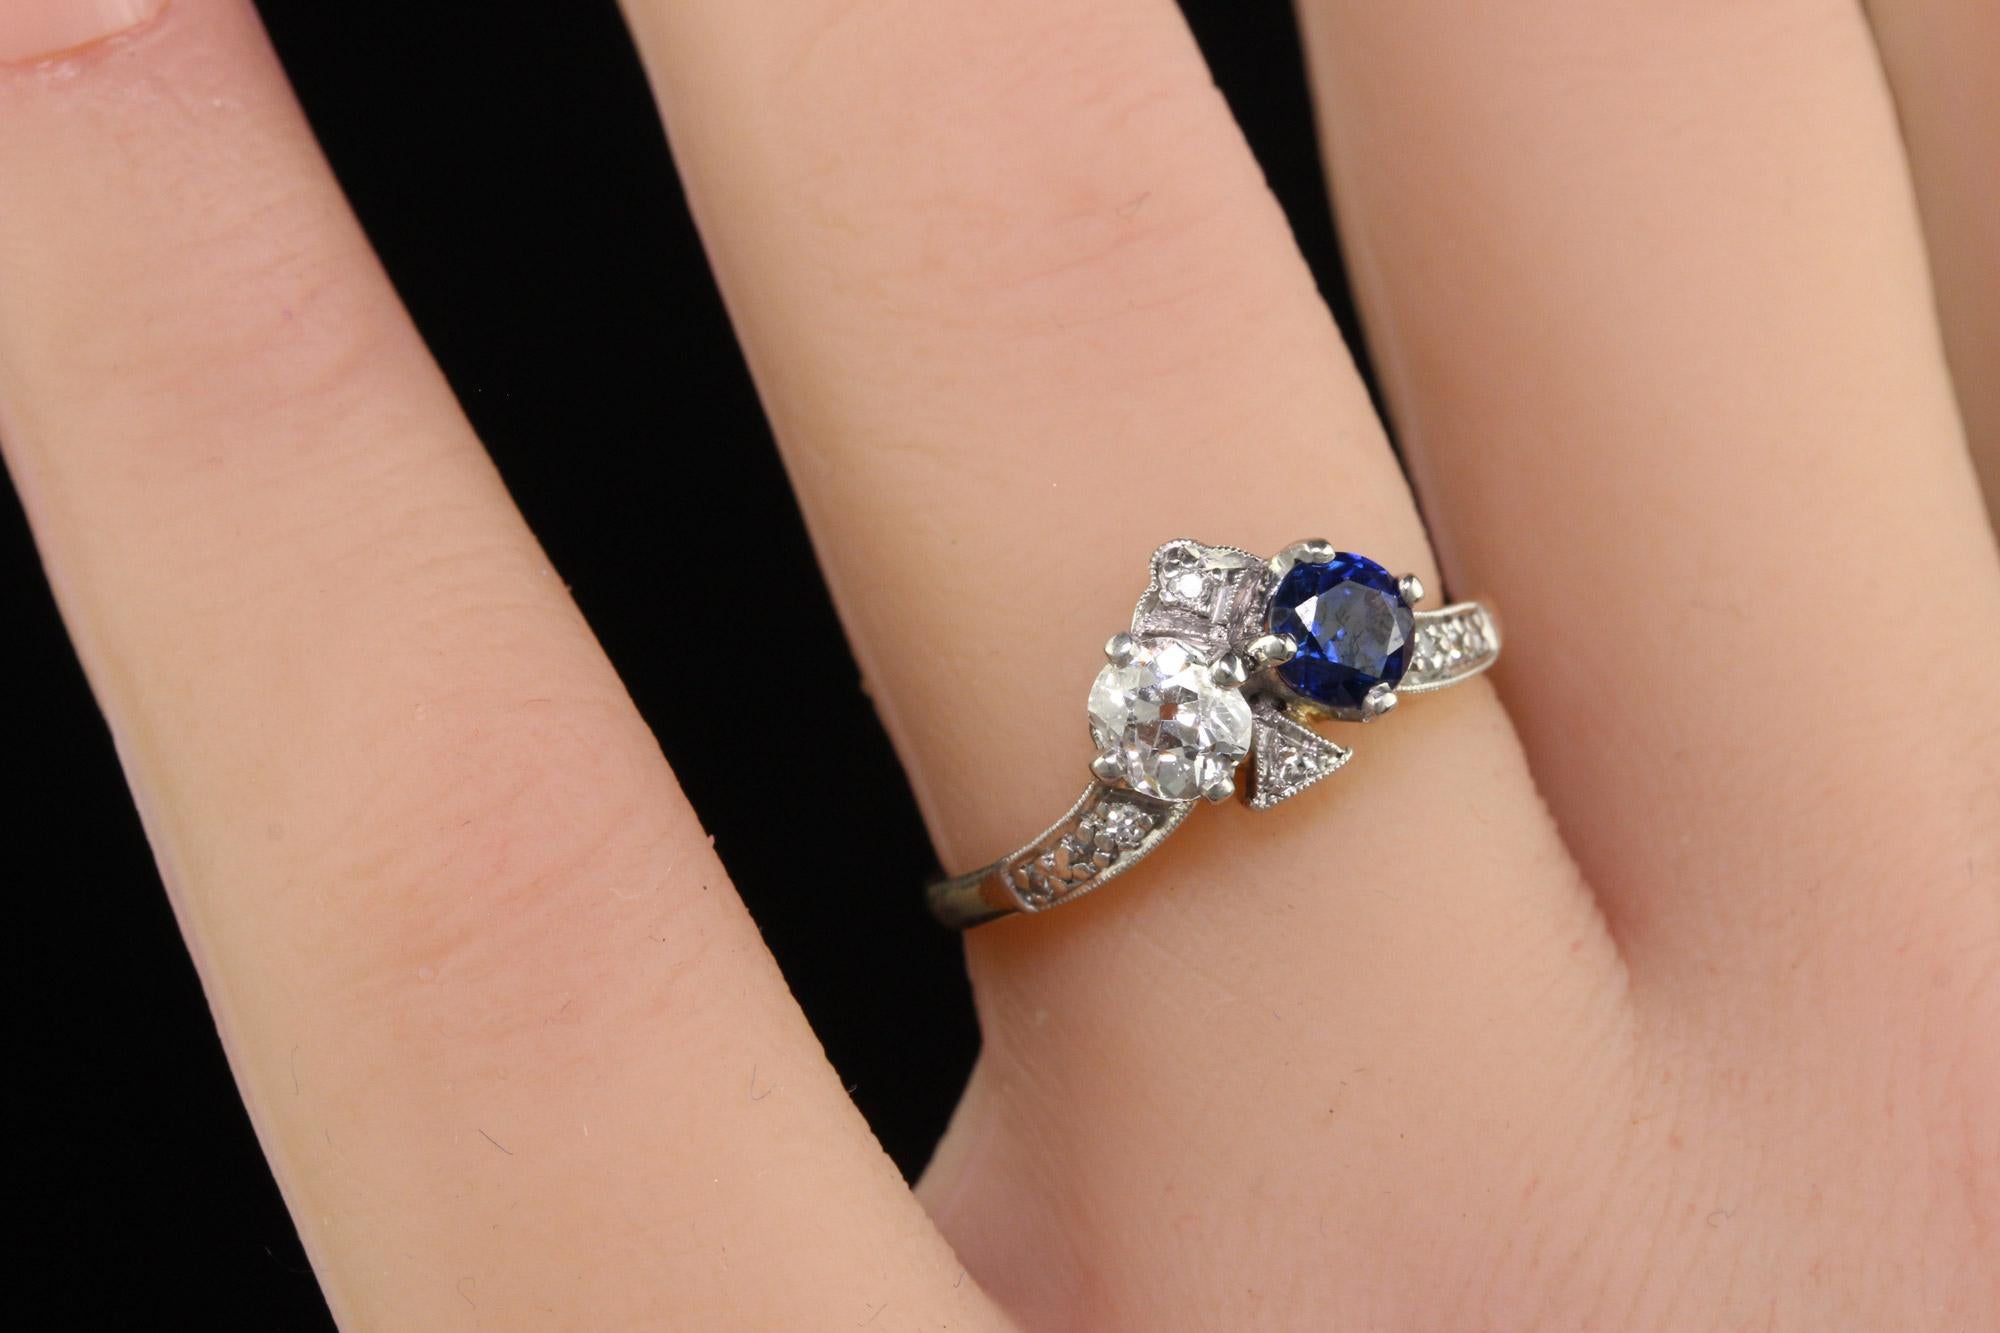 Antique Edwardian 14K Yellow Gold Platinum Old Euro Diamond and Sapphire Ring For Sale 2